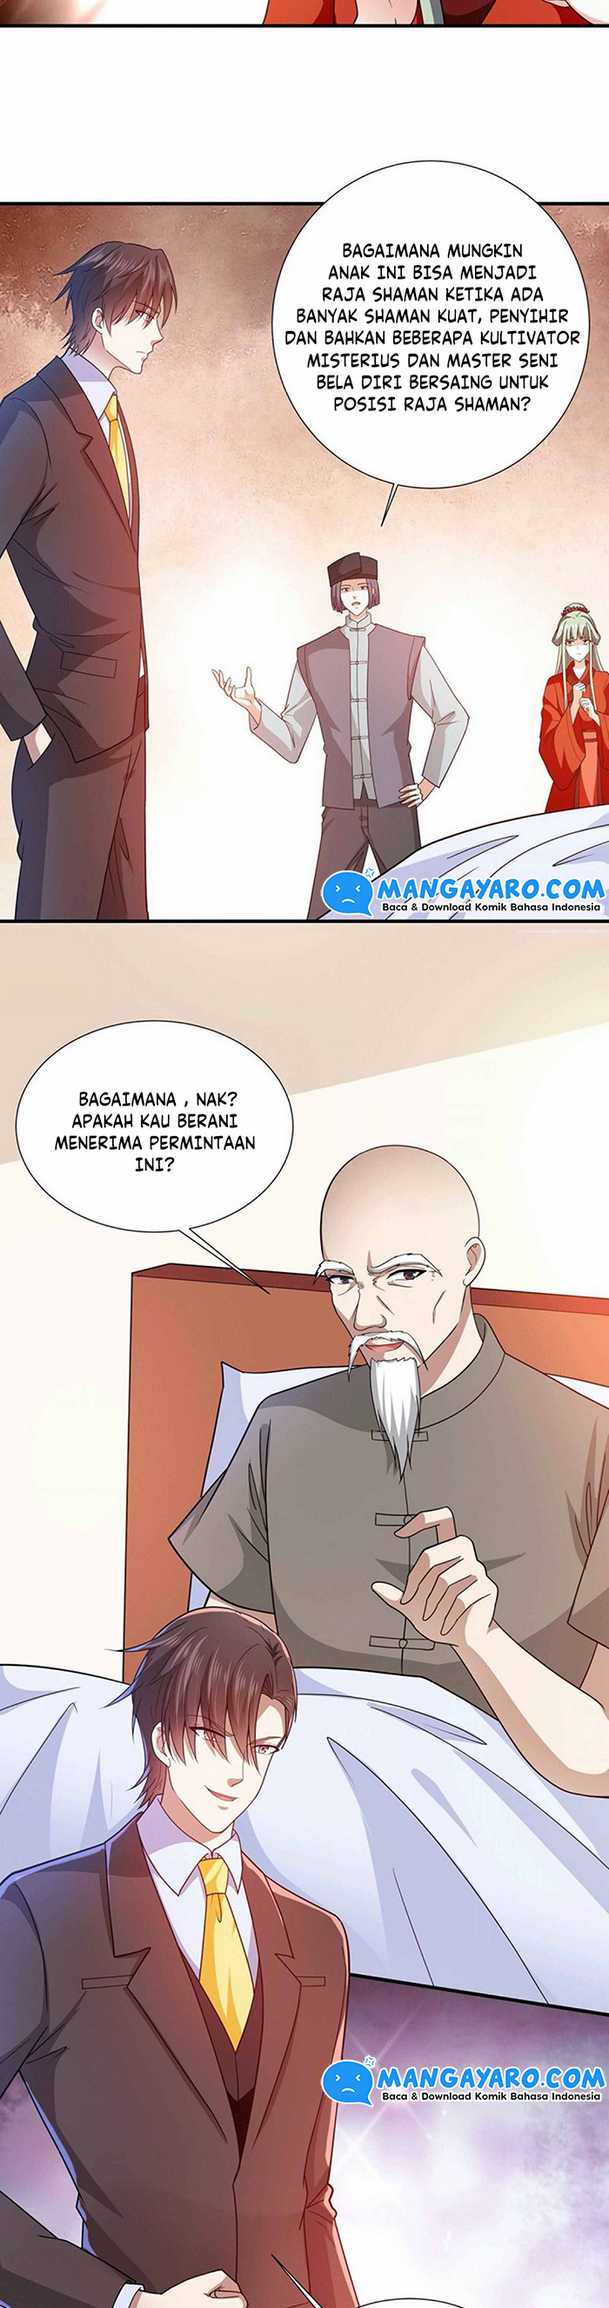 God of War Dragon Son-in-law Chapter 74 12